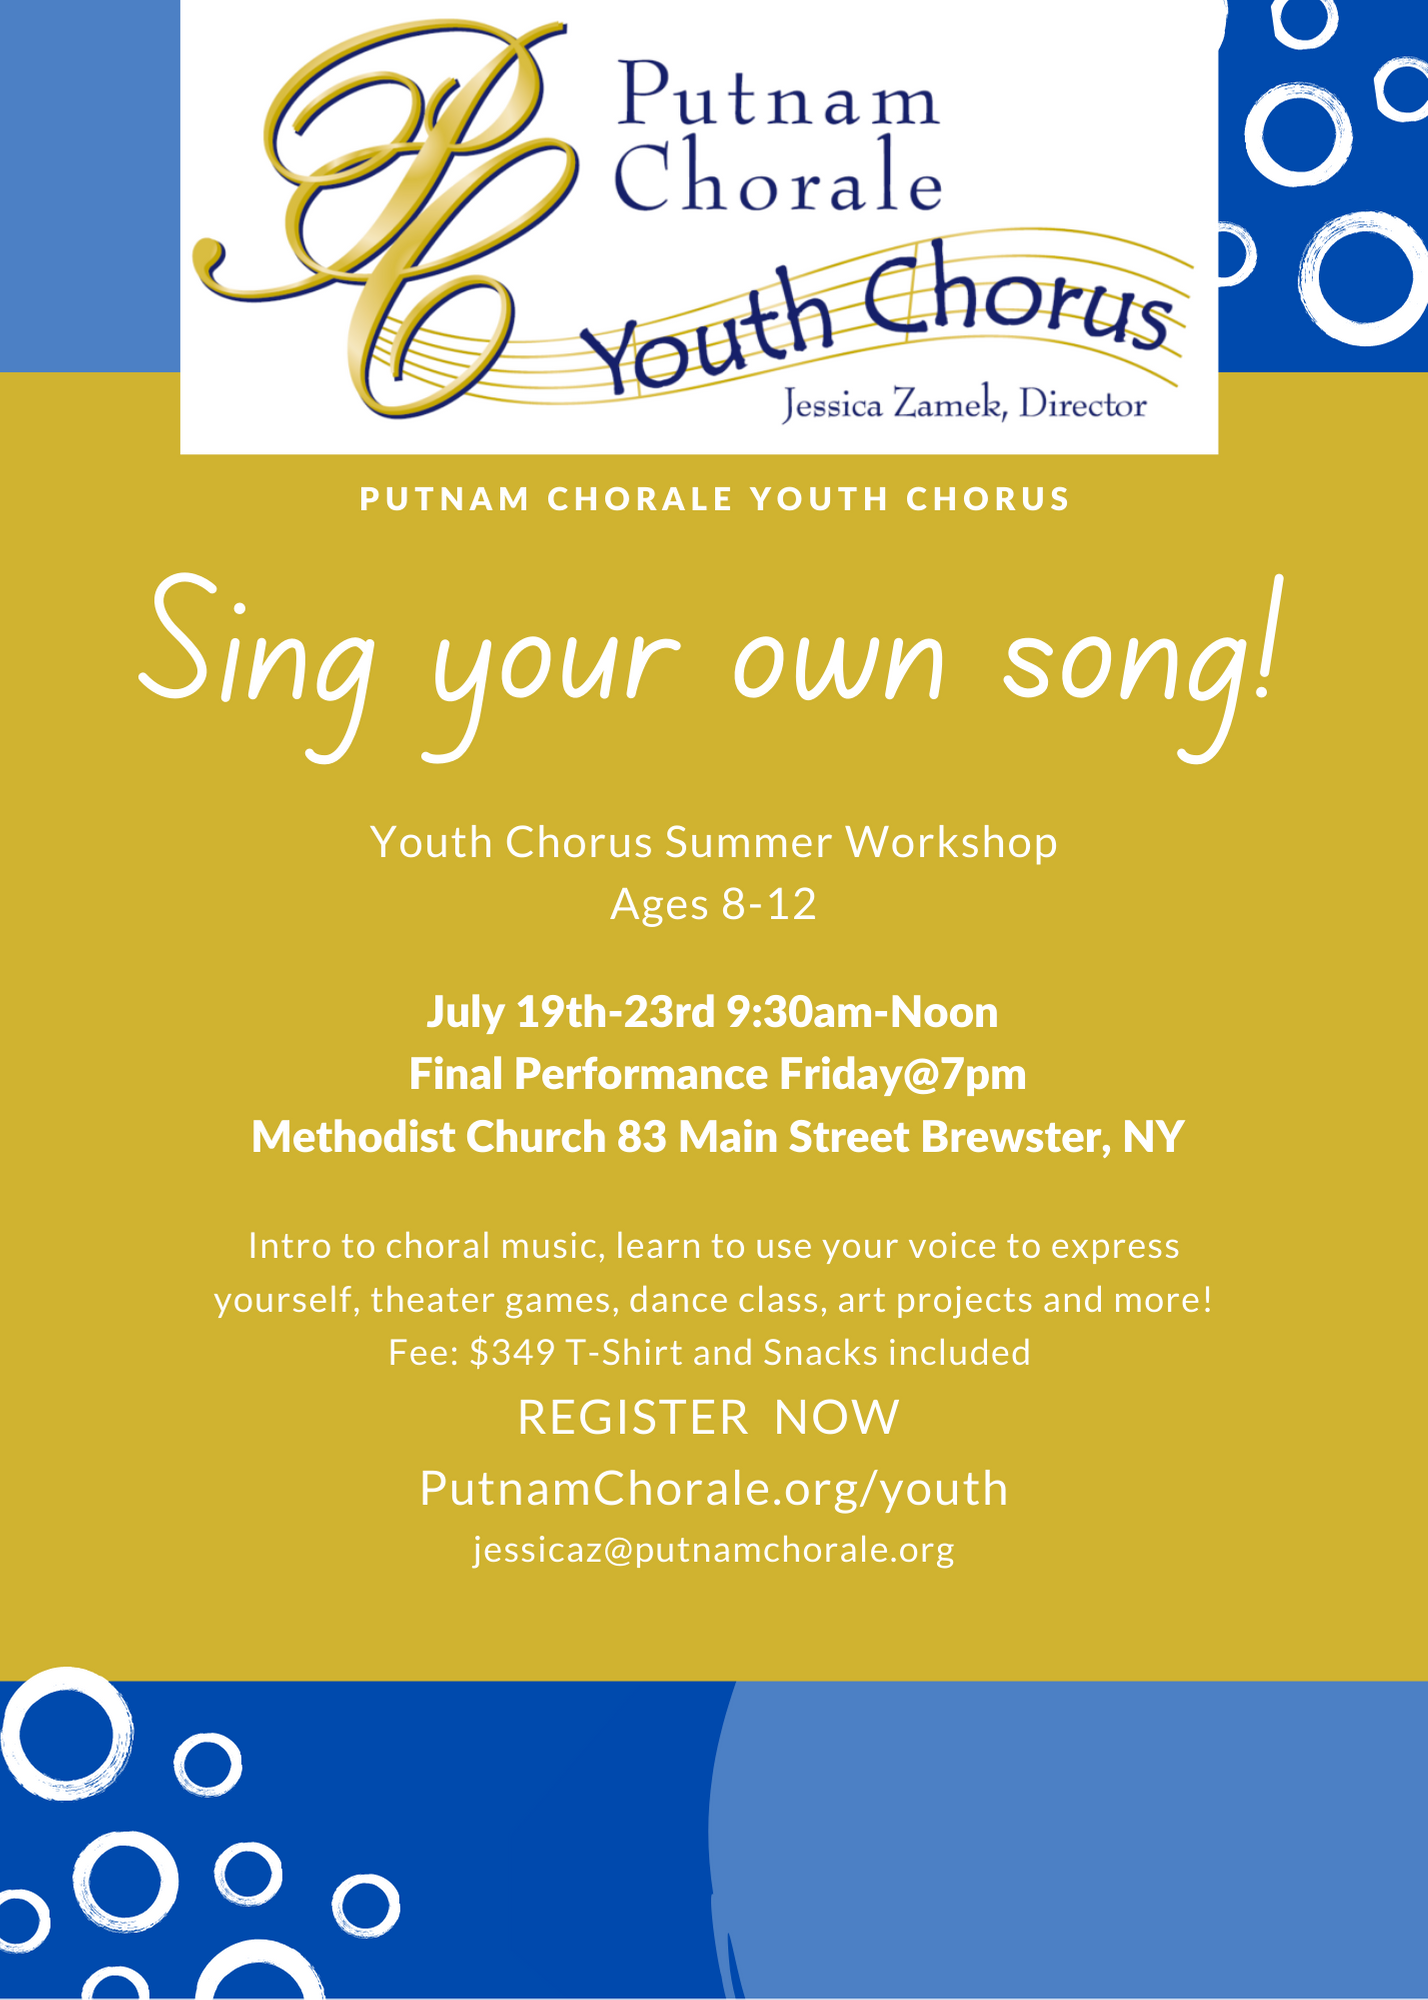 Putnam Chorale Sing Your Own Song